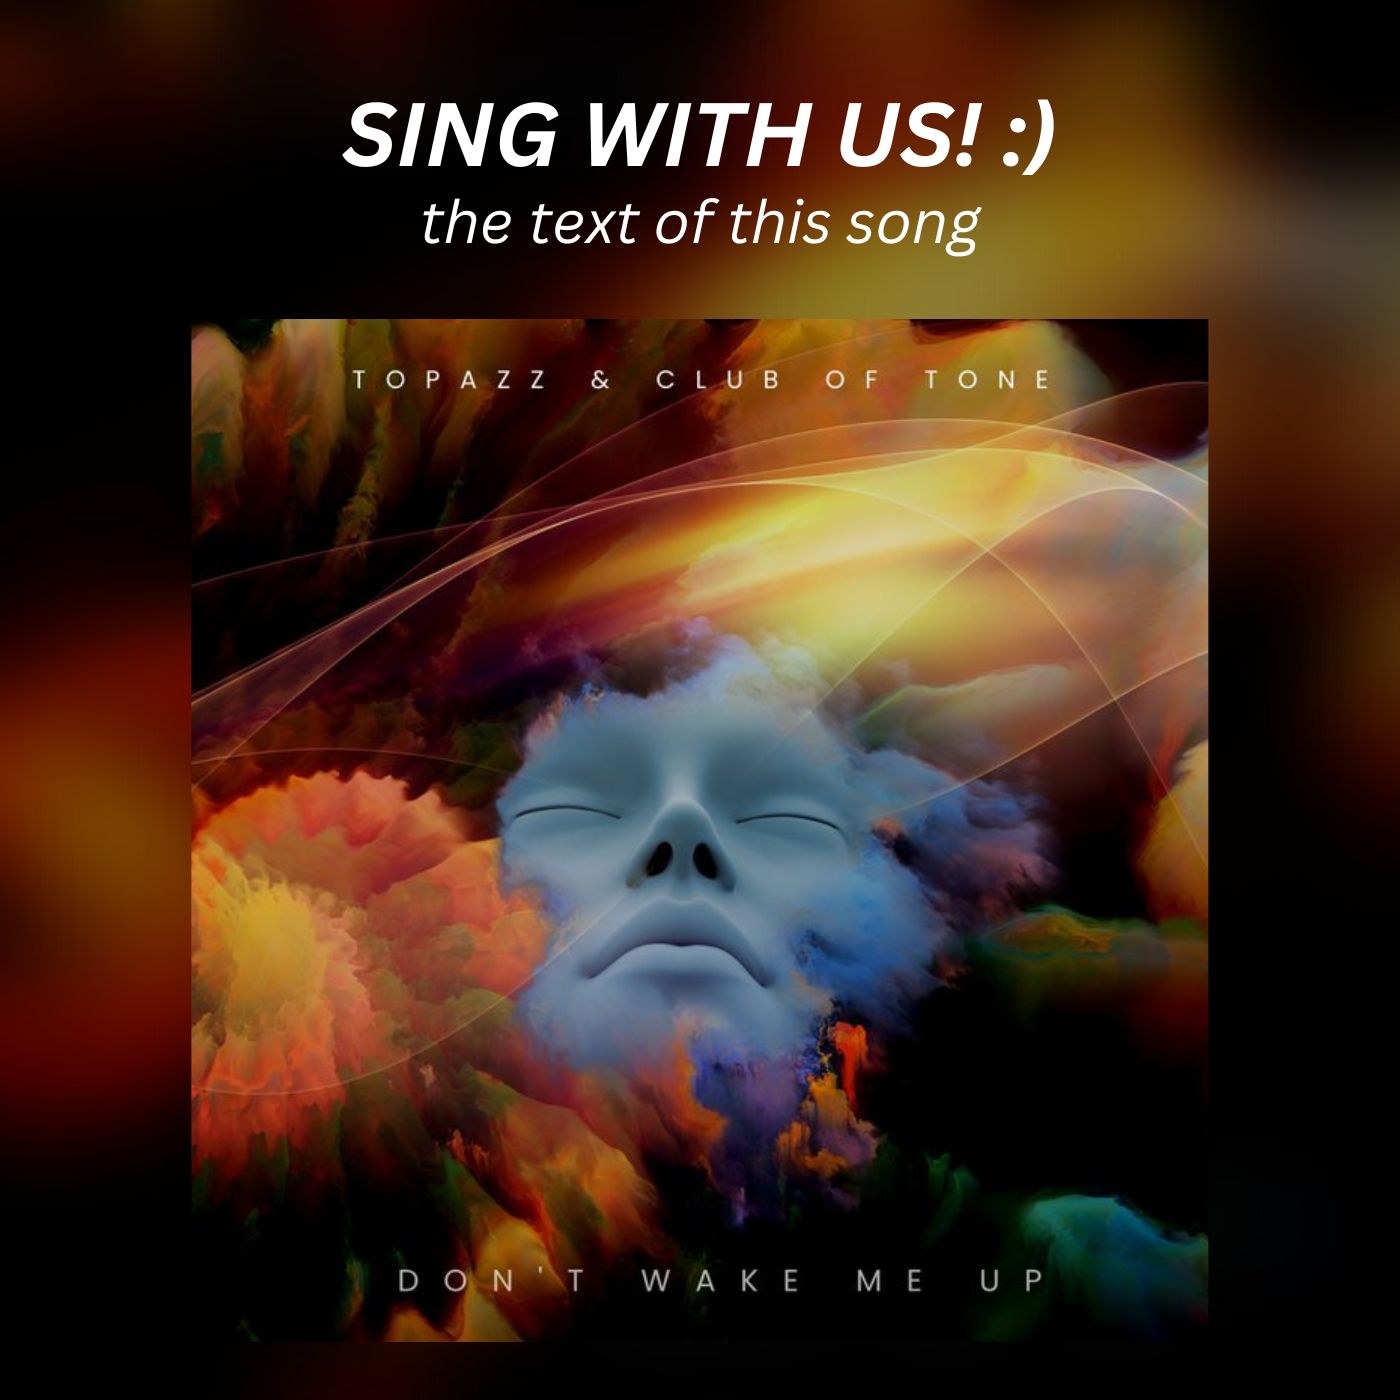 Sing with us: DONT WAKE ME UP by Club of Tone